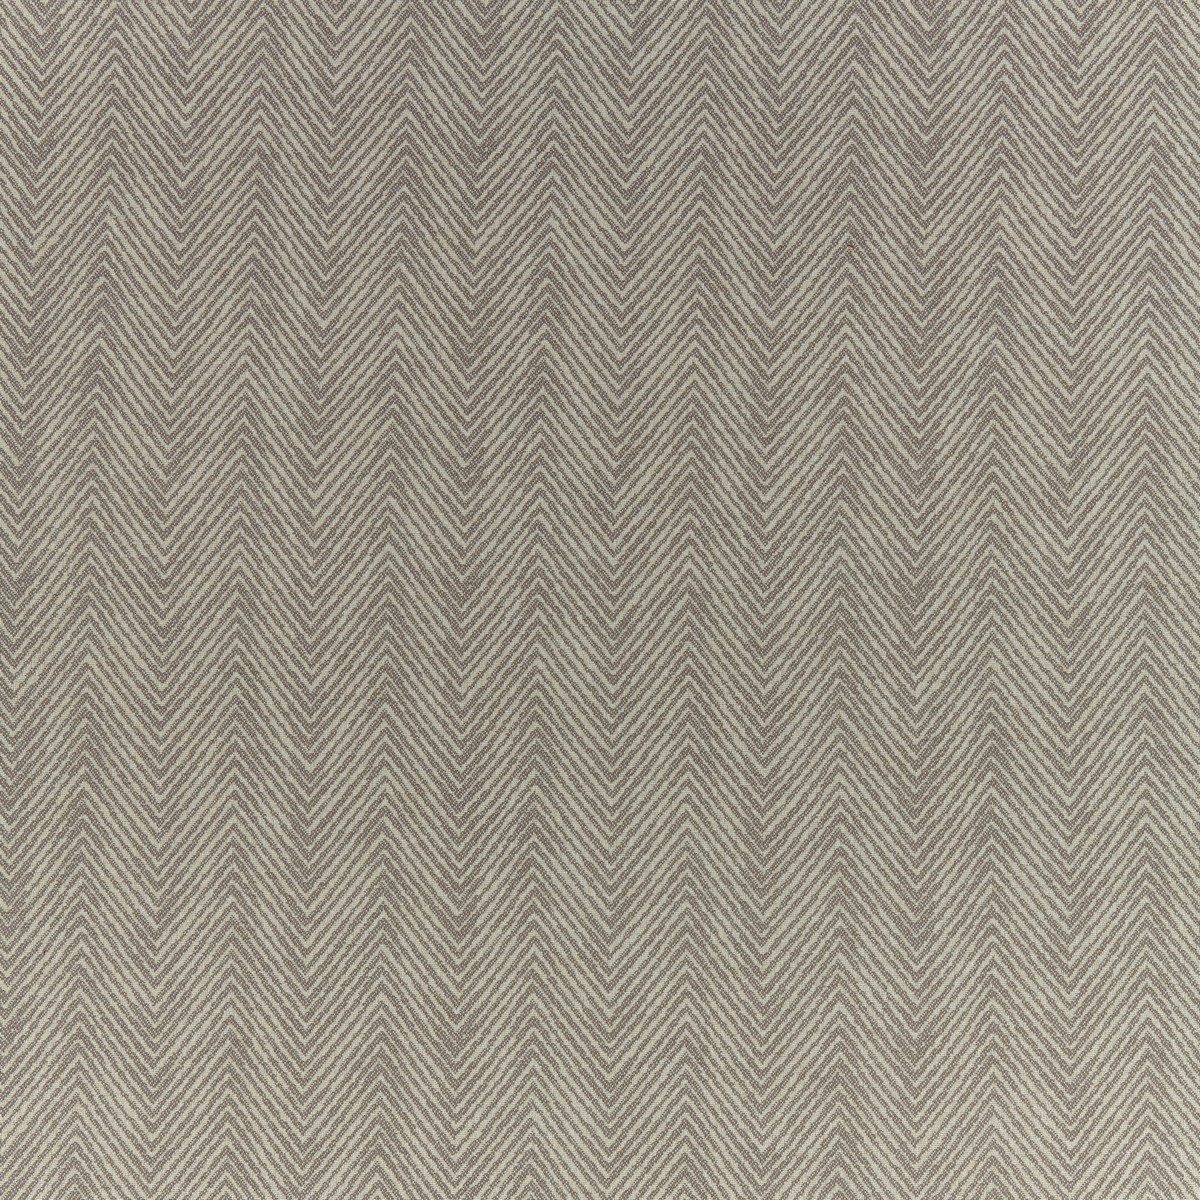 Sula Taupe Fabric by iLiv